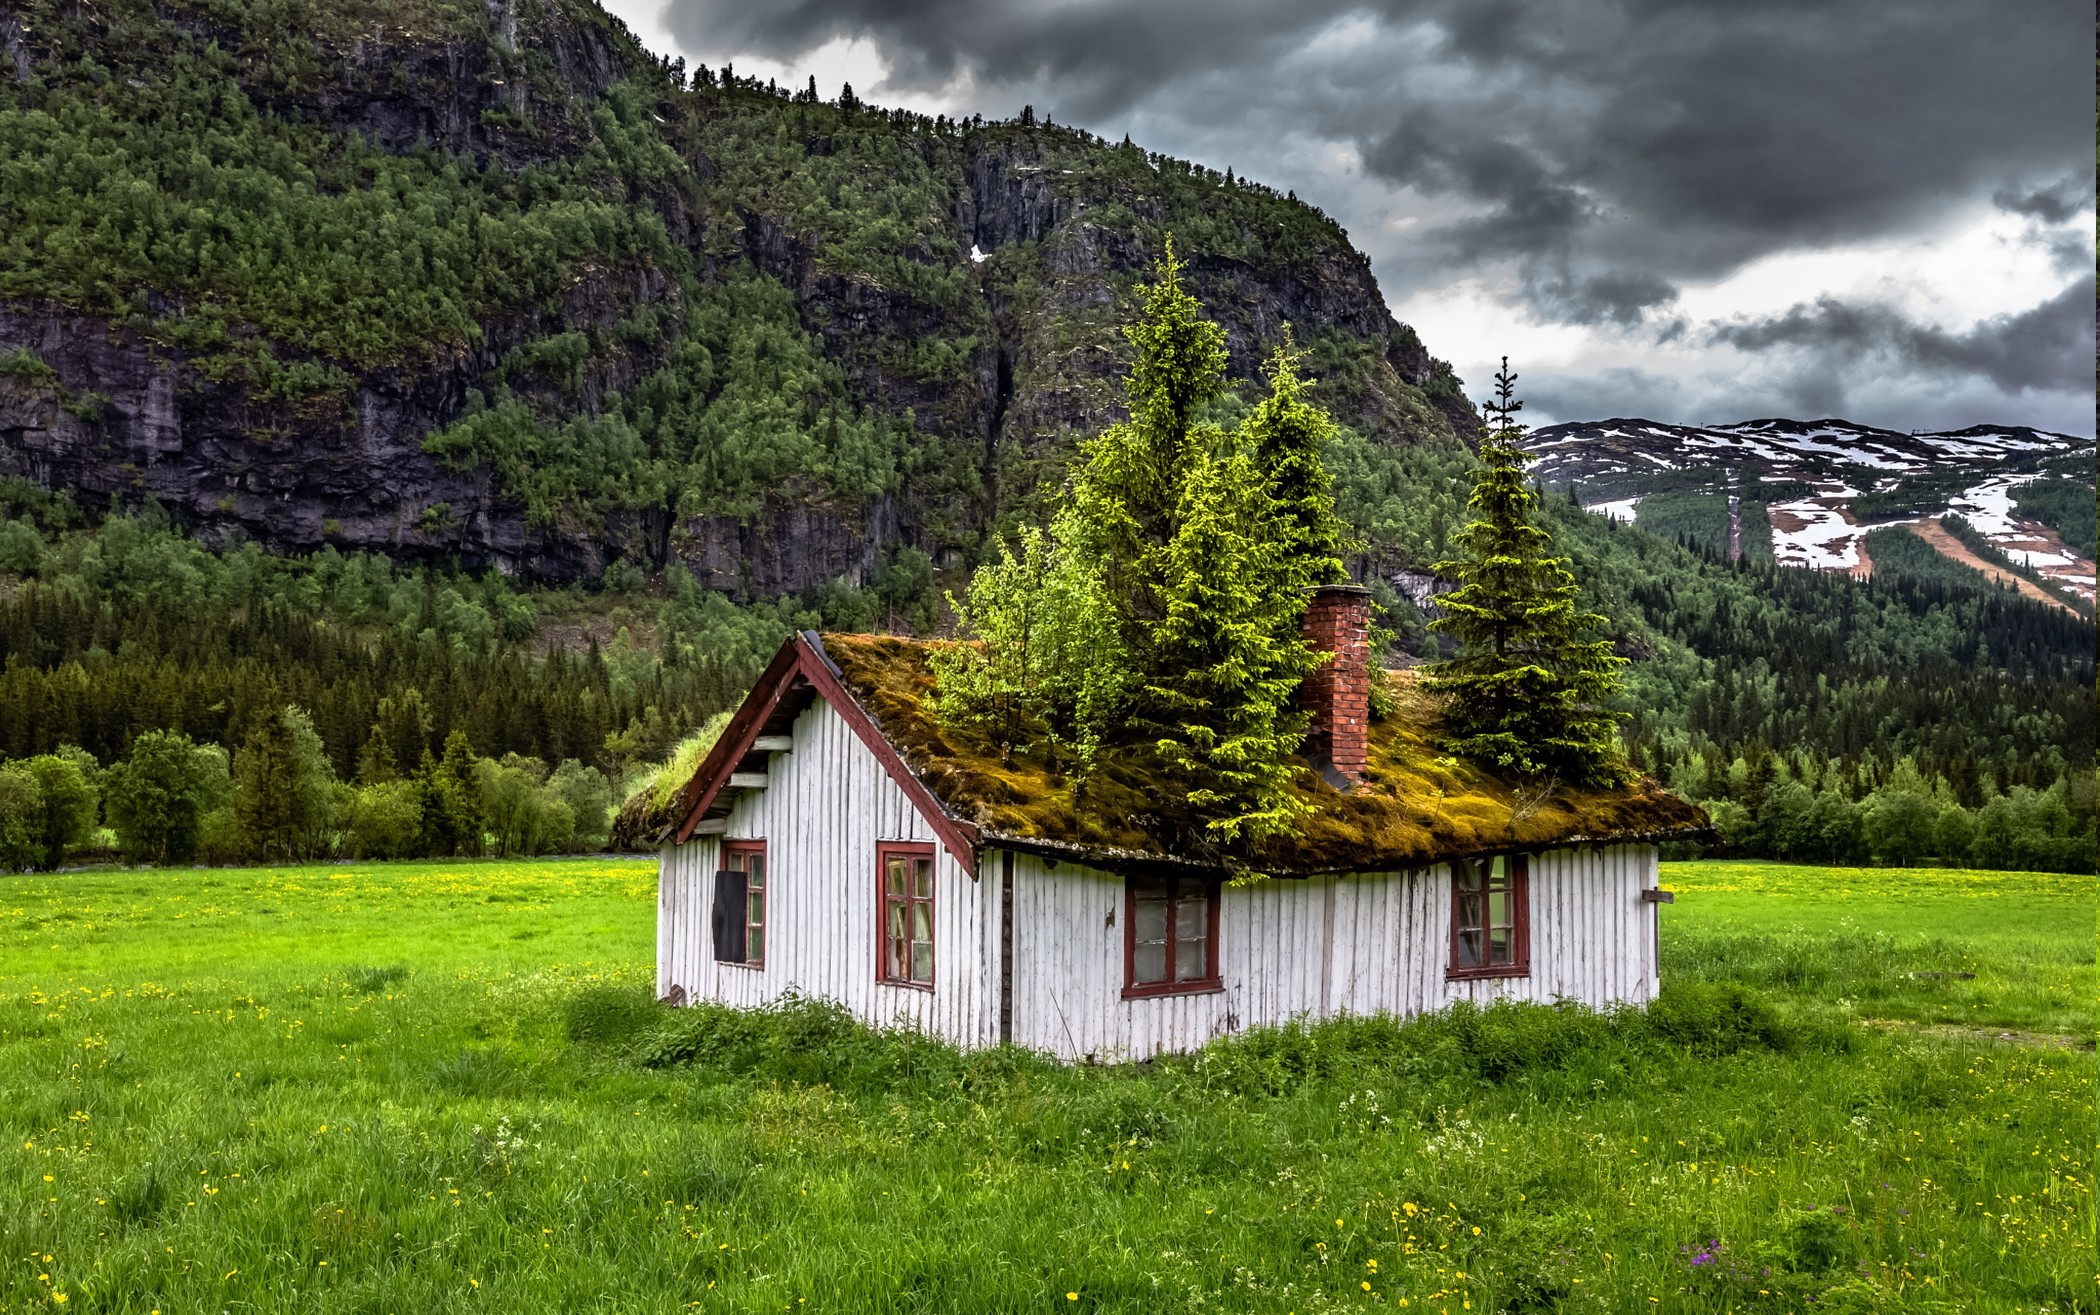 landscape, Nature, Summer, Abandoned, Norway, Grass, Clouds, Mountain, House, Trees, Green Wallpaper